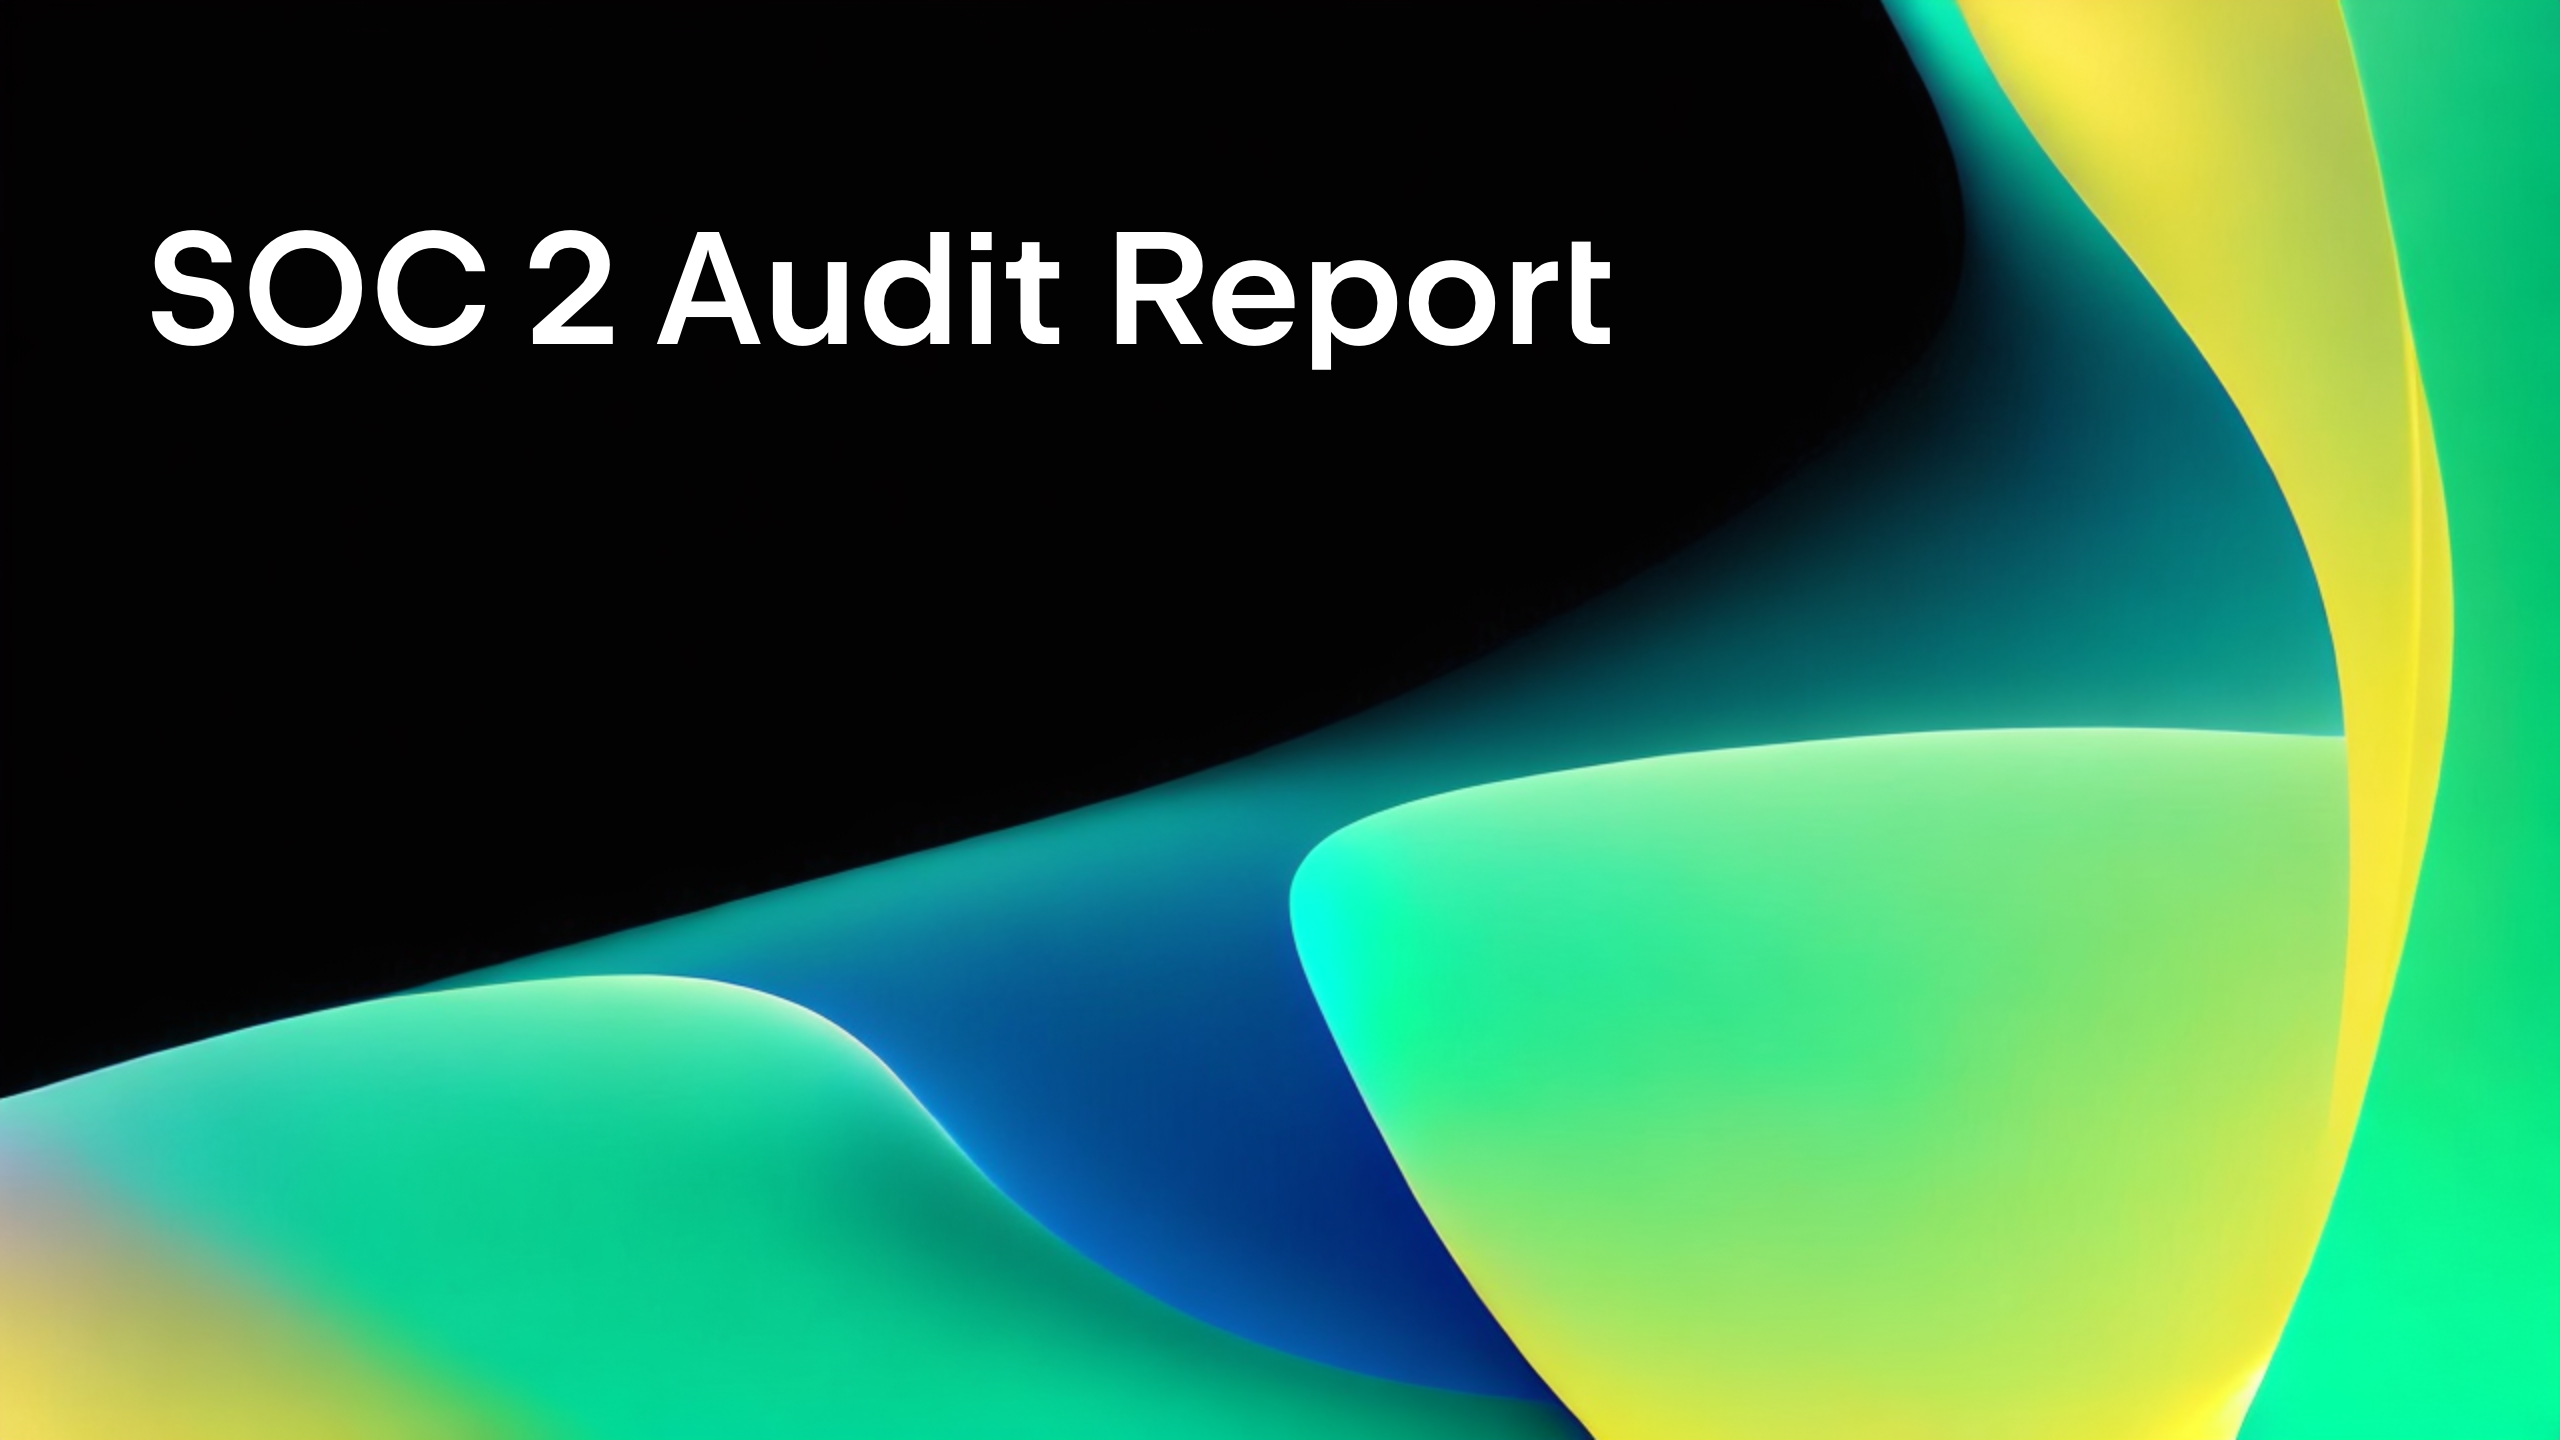 New Security Milestone for JetBrains and Datalore: SOC 2 Audit Report